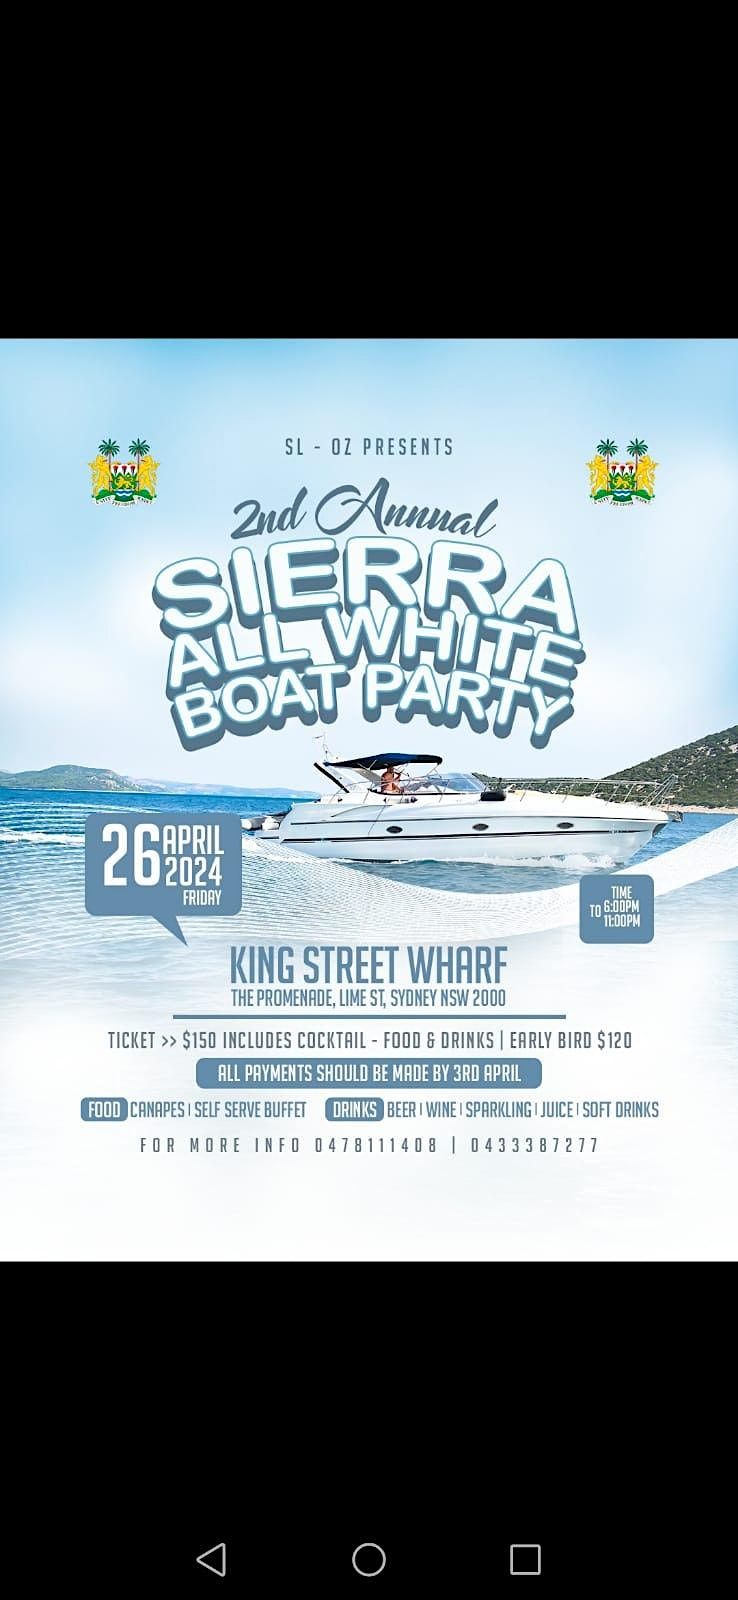 Sierra All White Boat Party